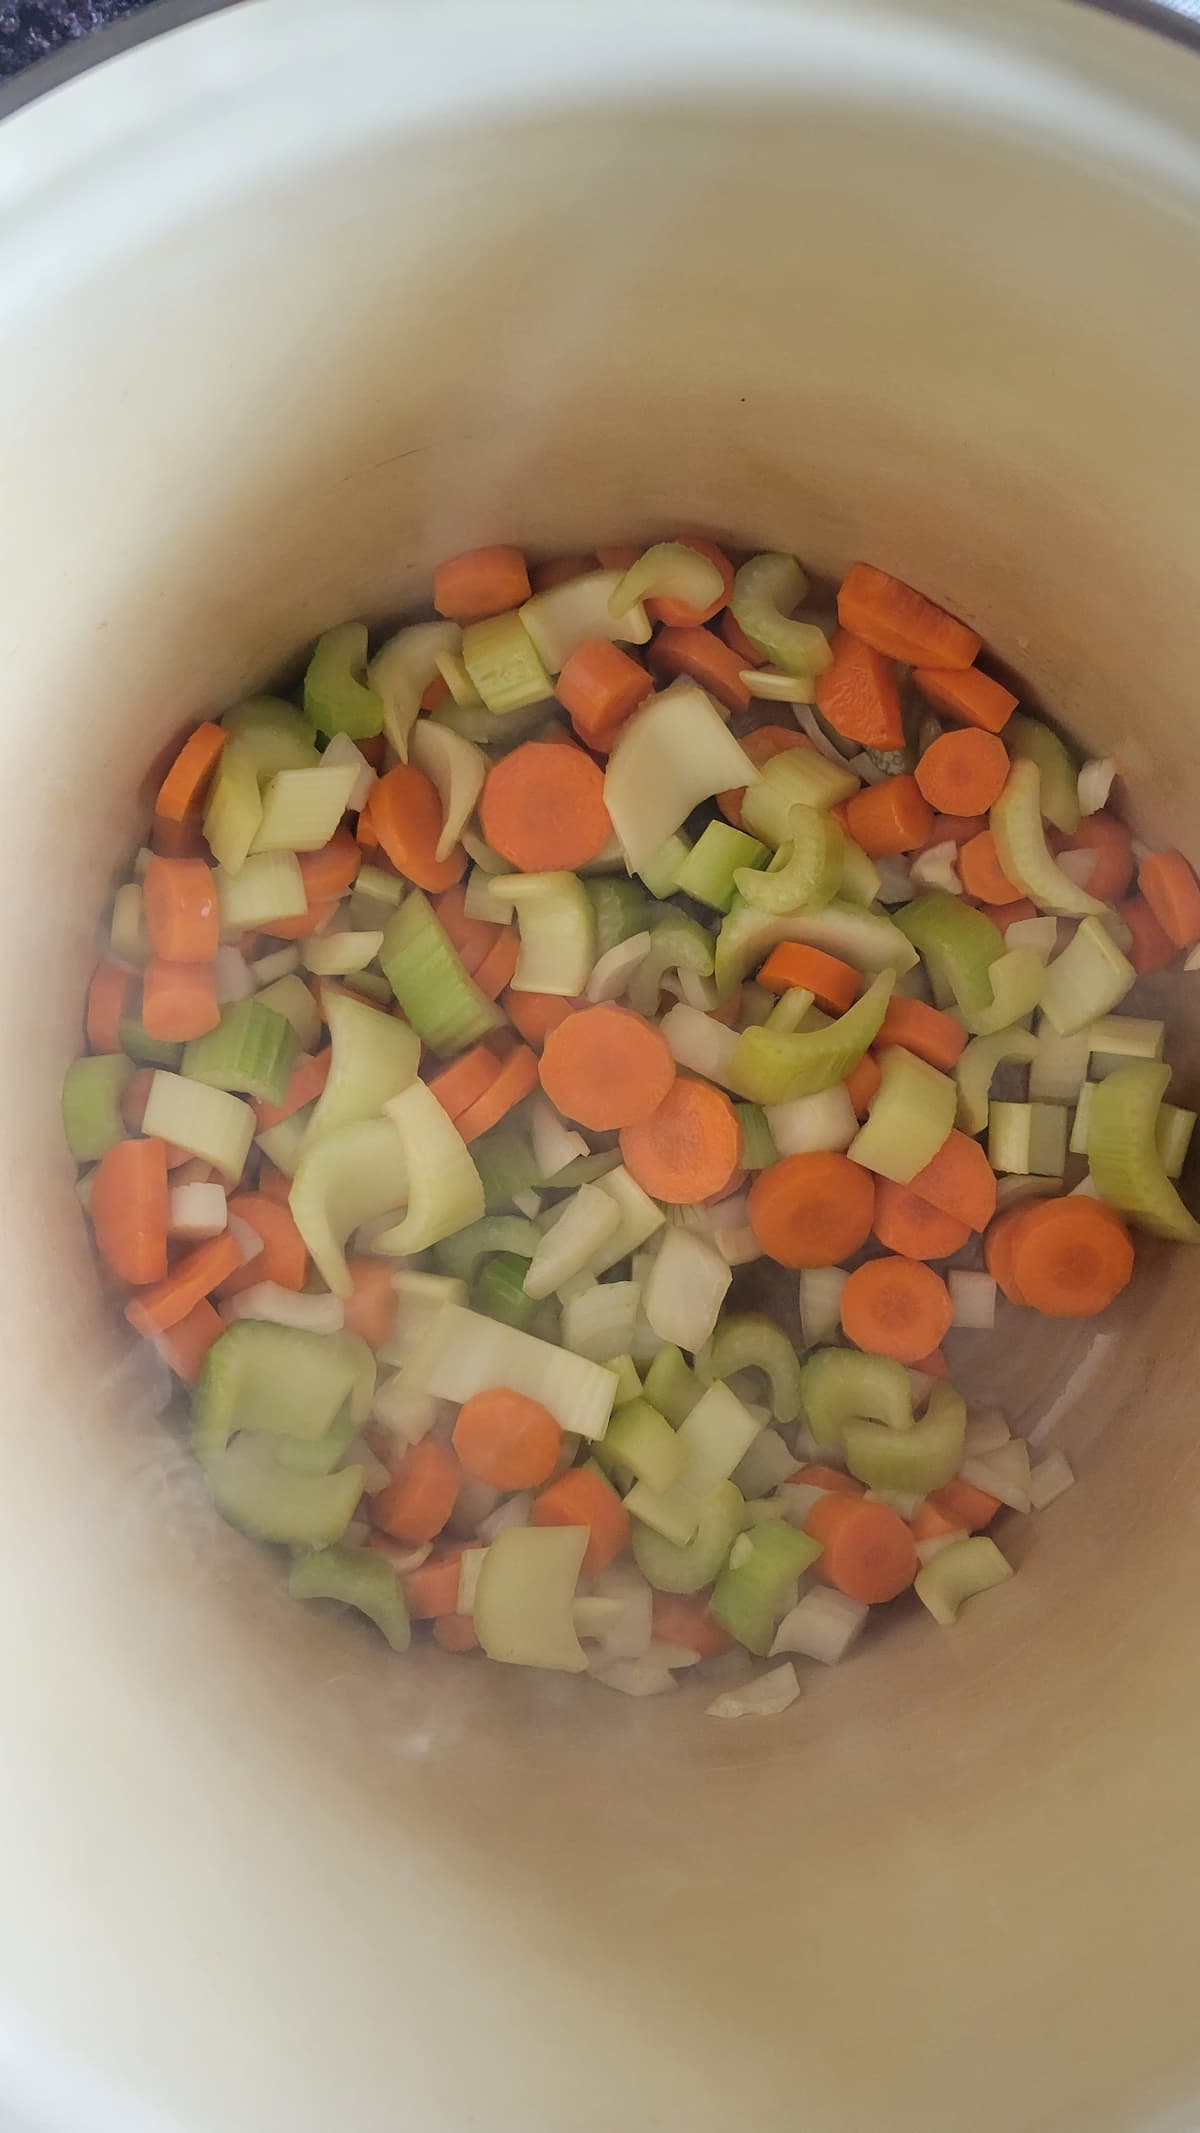 diced celery, onions and carrots in a pot